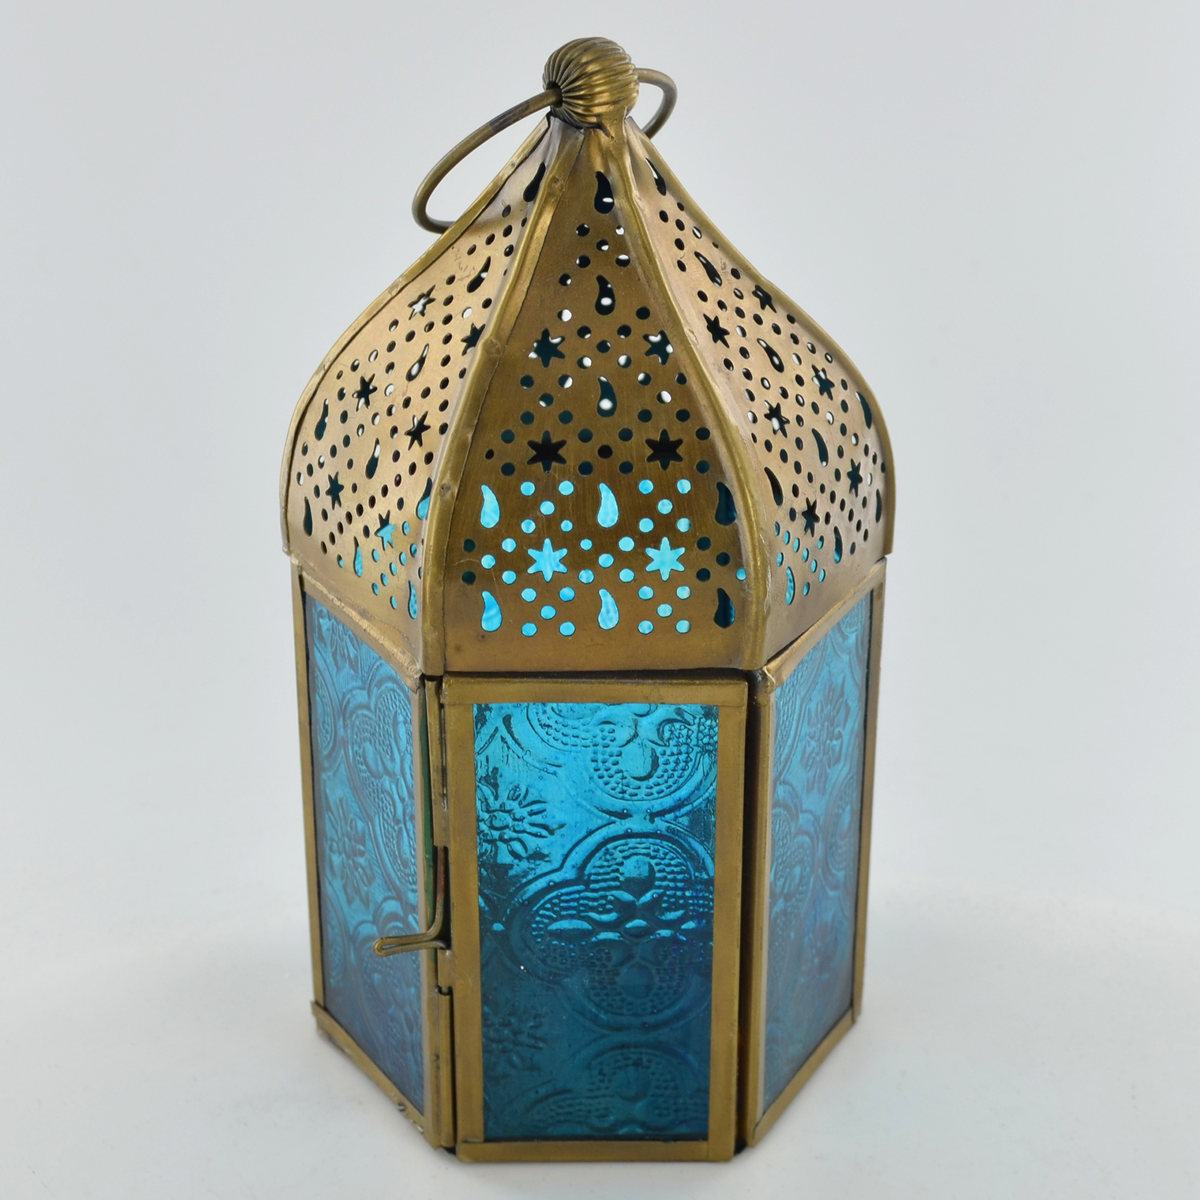 Moroccan Style Blue Set Of 2 Small Lanterns